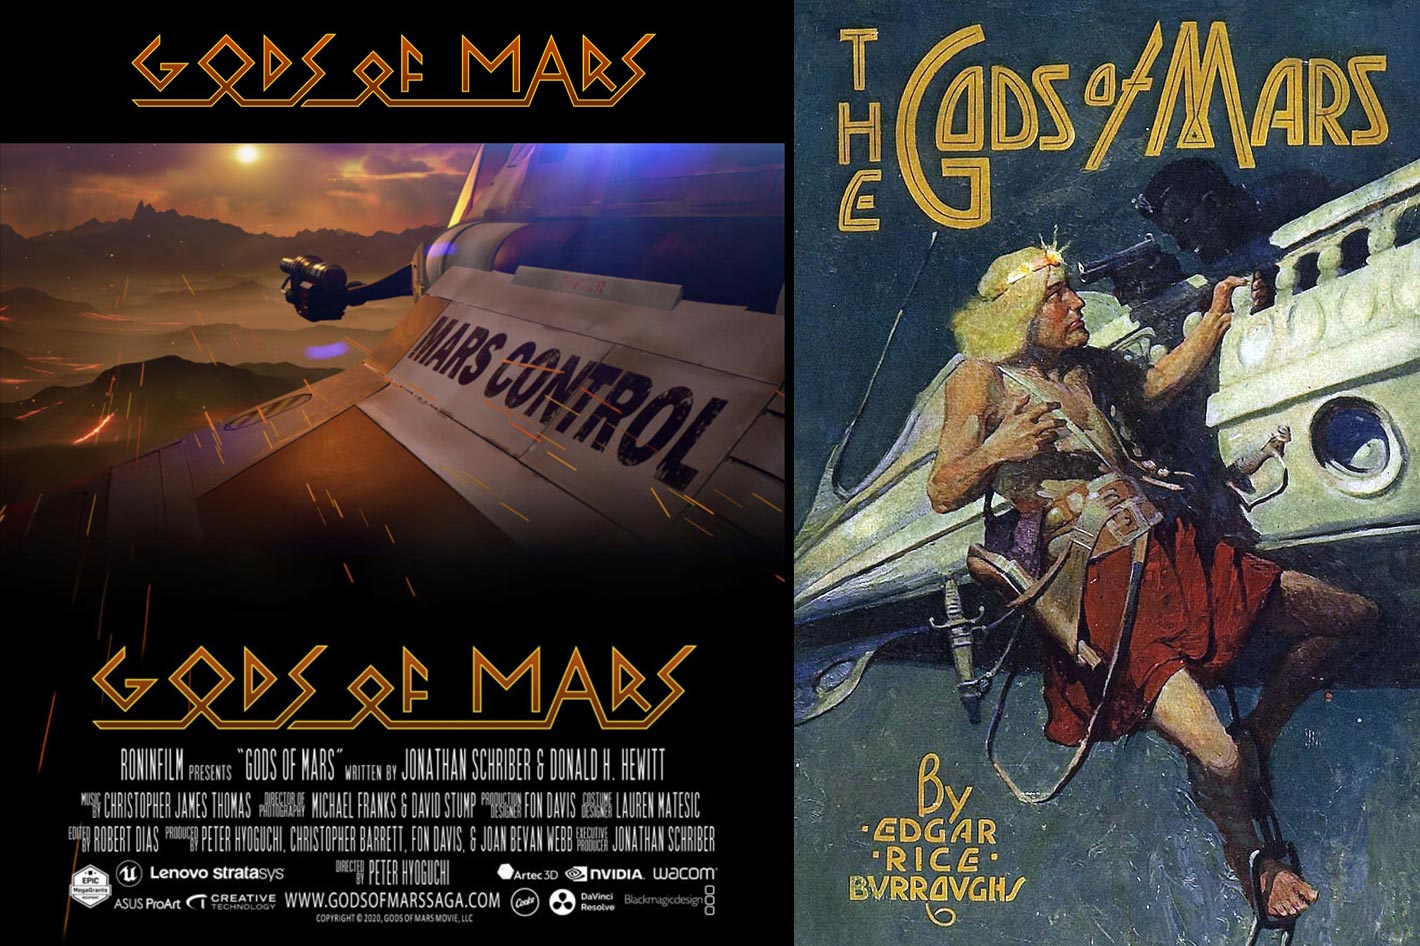 Gods of Mars: a sci-fi epic made with Unreal and Virtual Production